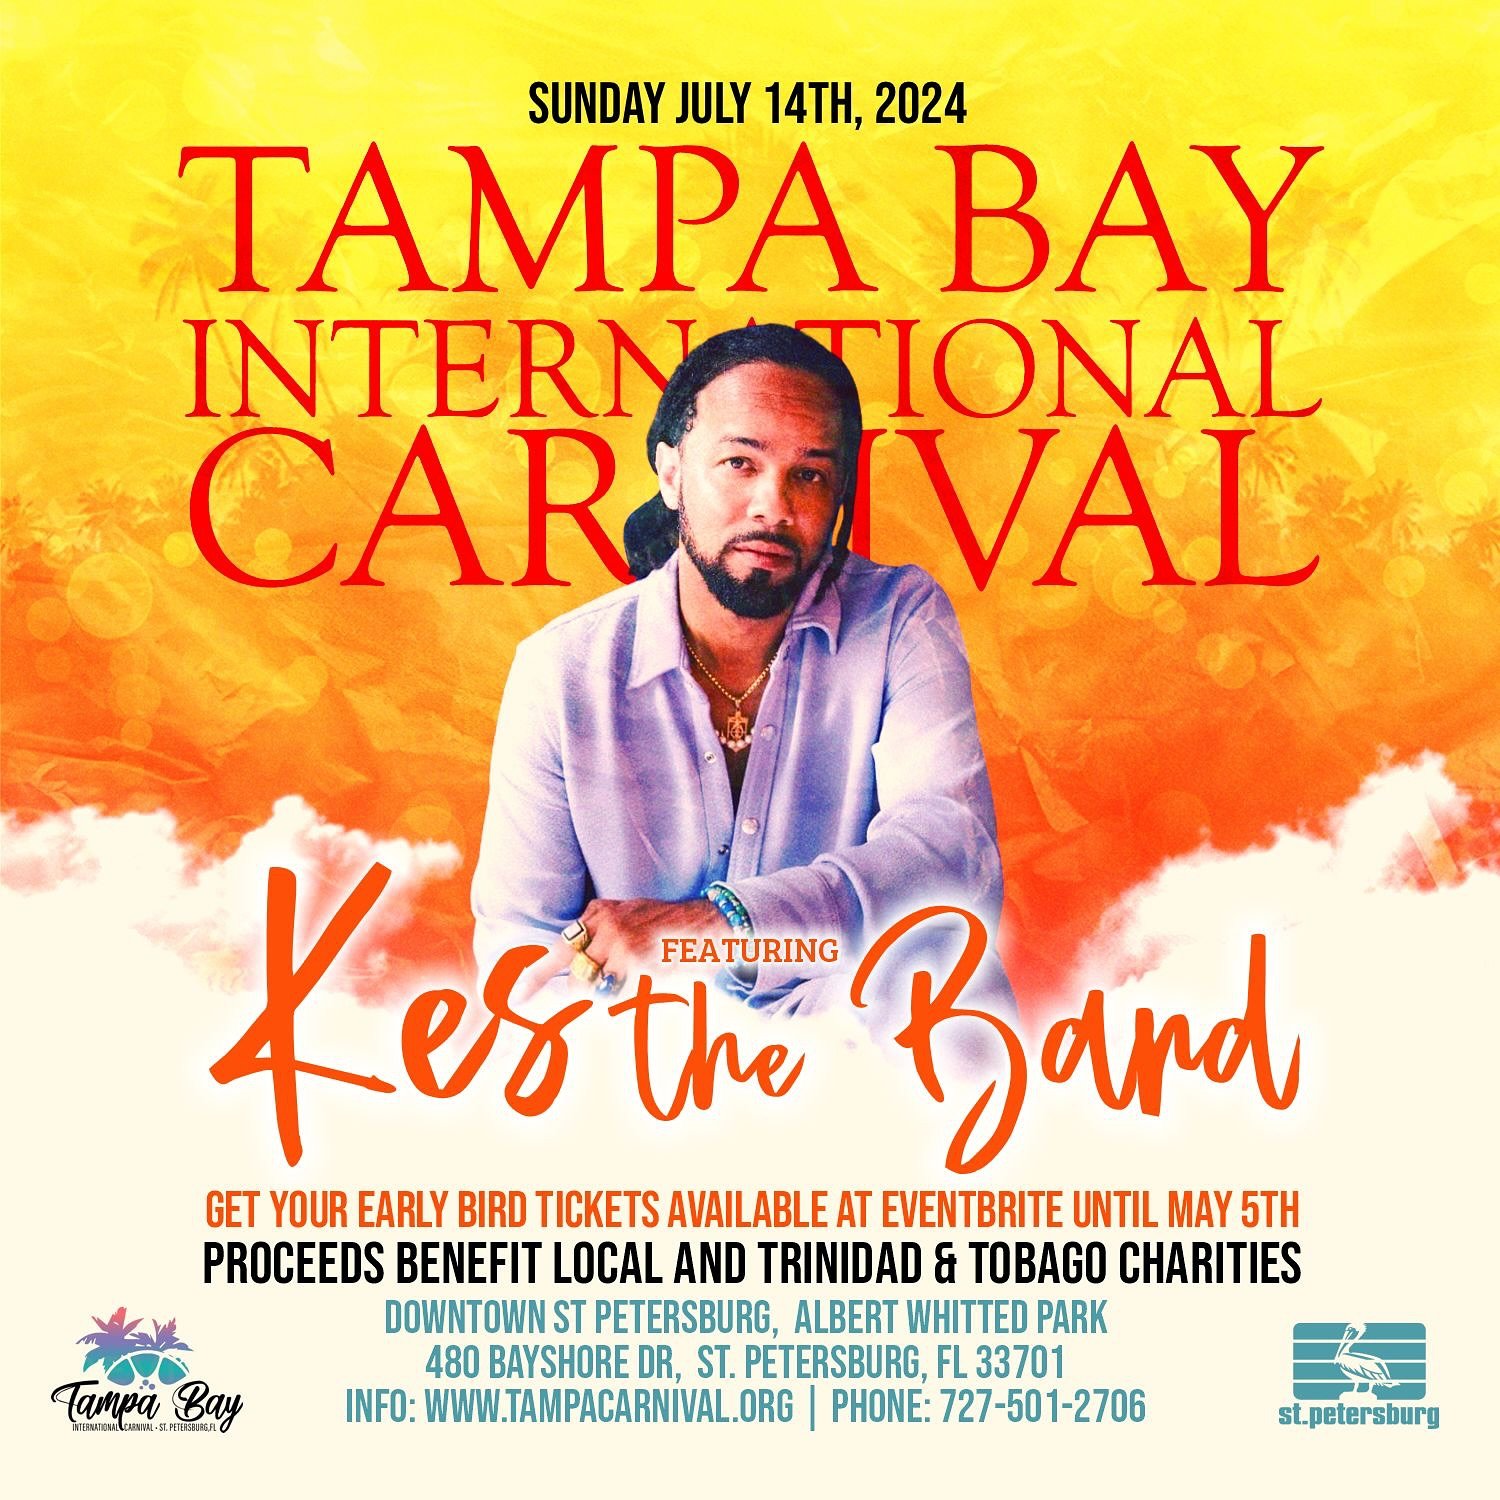 Tampa Bay International Carnival, get ready for us! 🔥🌴

🗓️ Sunday 14th July, 2024
📍Downtown St. Petersburg, Albert Whitted Park, Florida
🎟️ tampacarnival.com